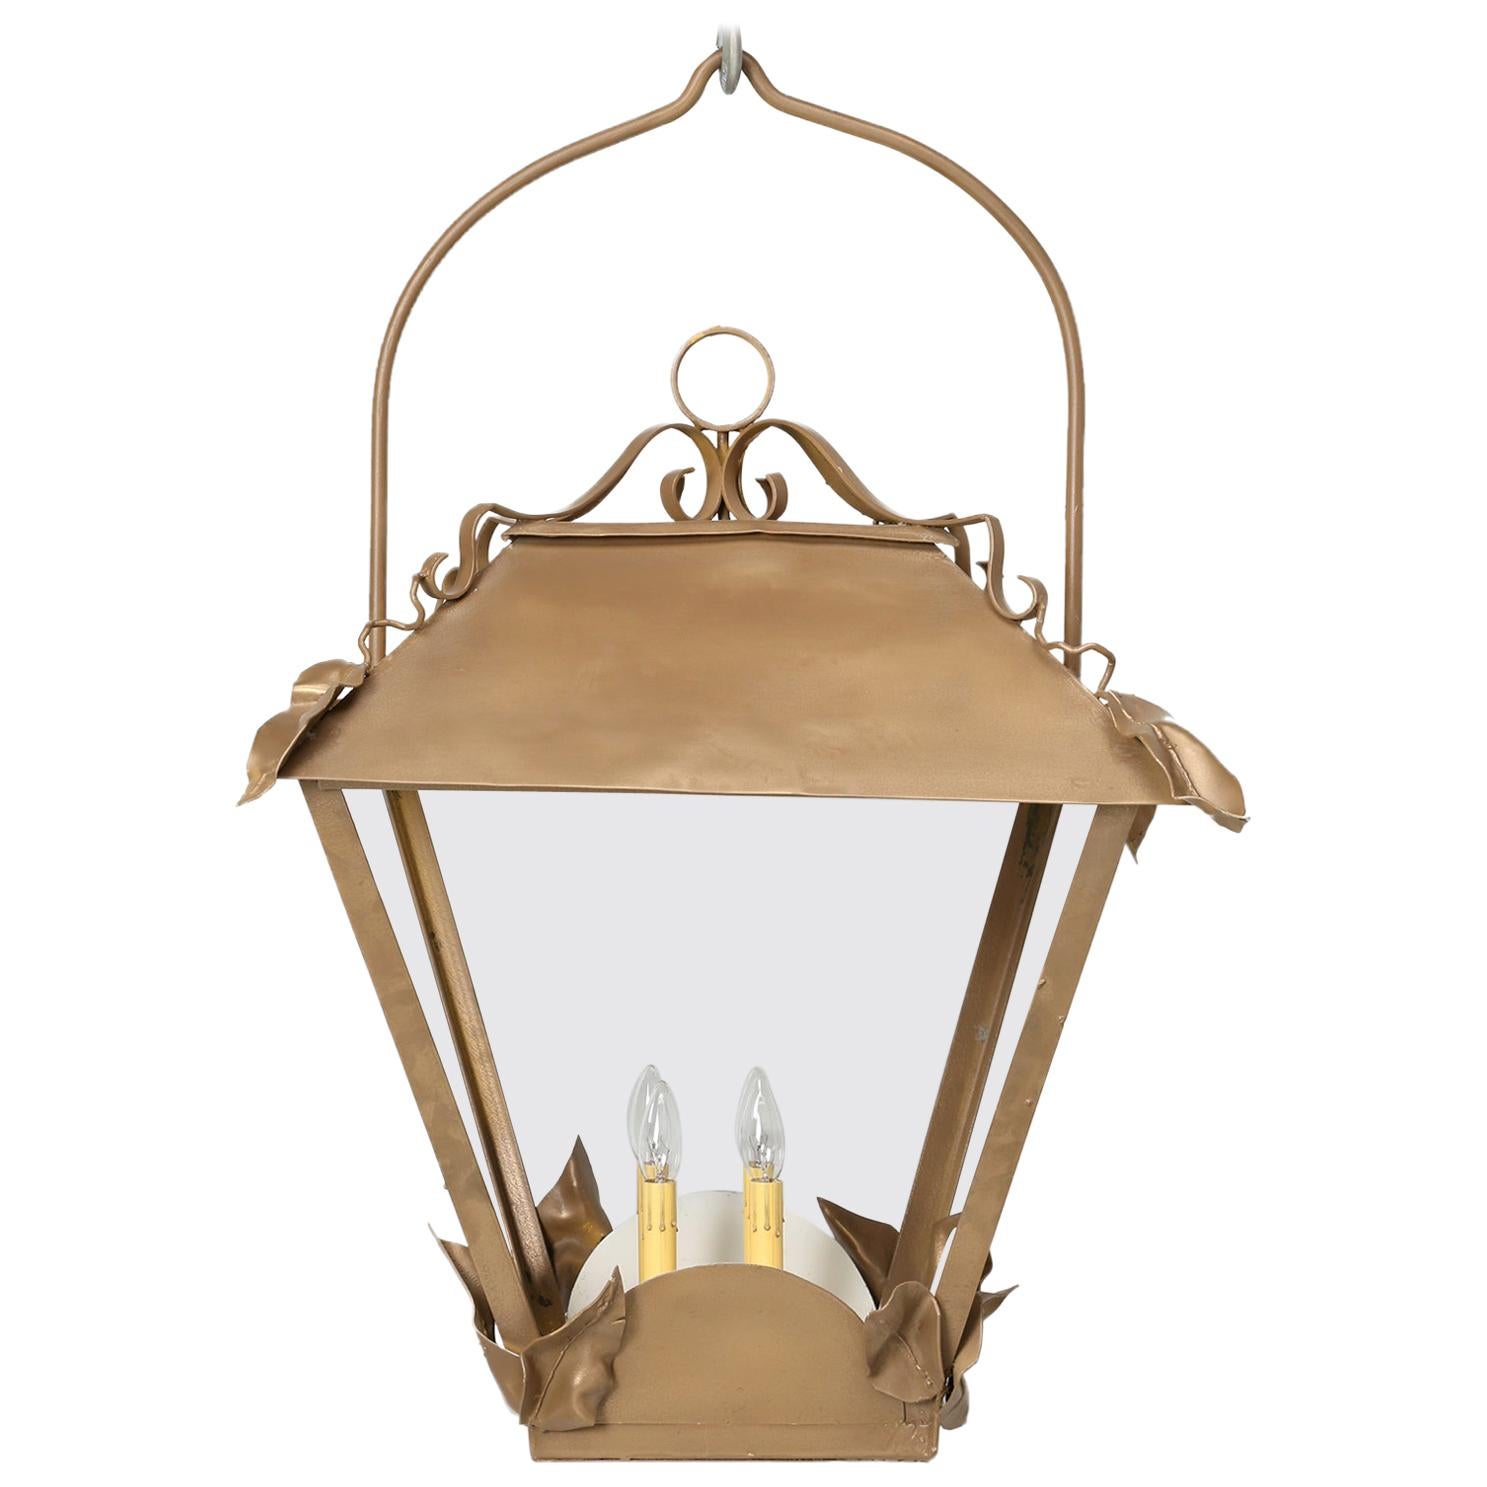 Vintage French Lantern Restored with American Sockets